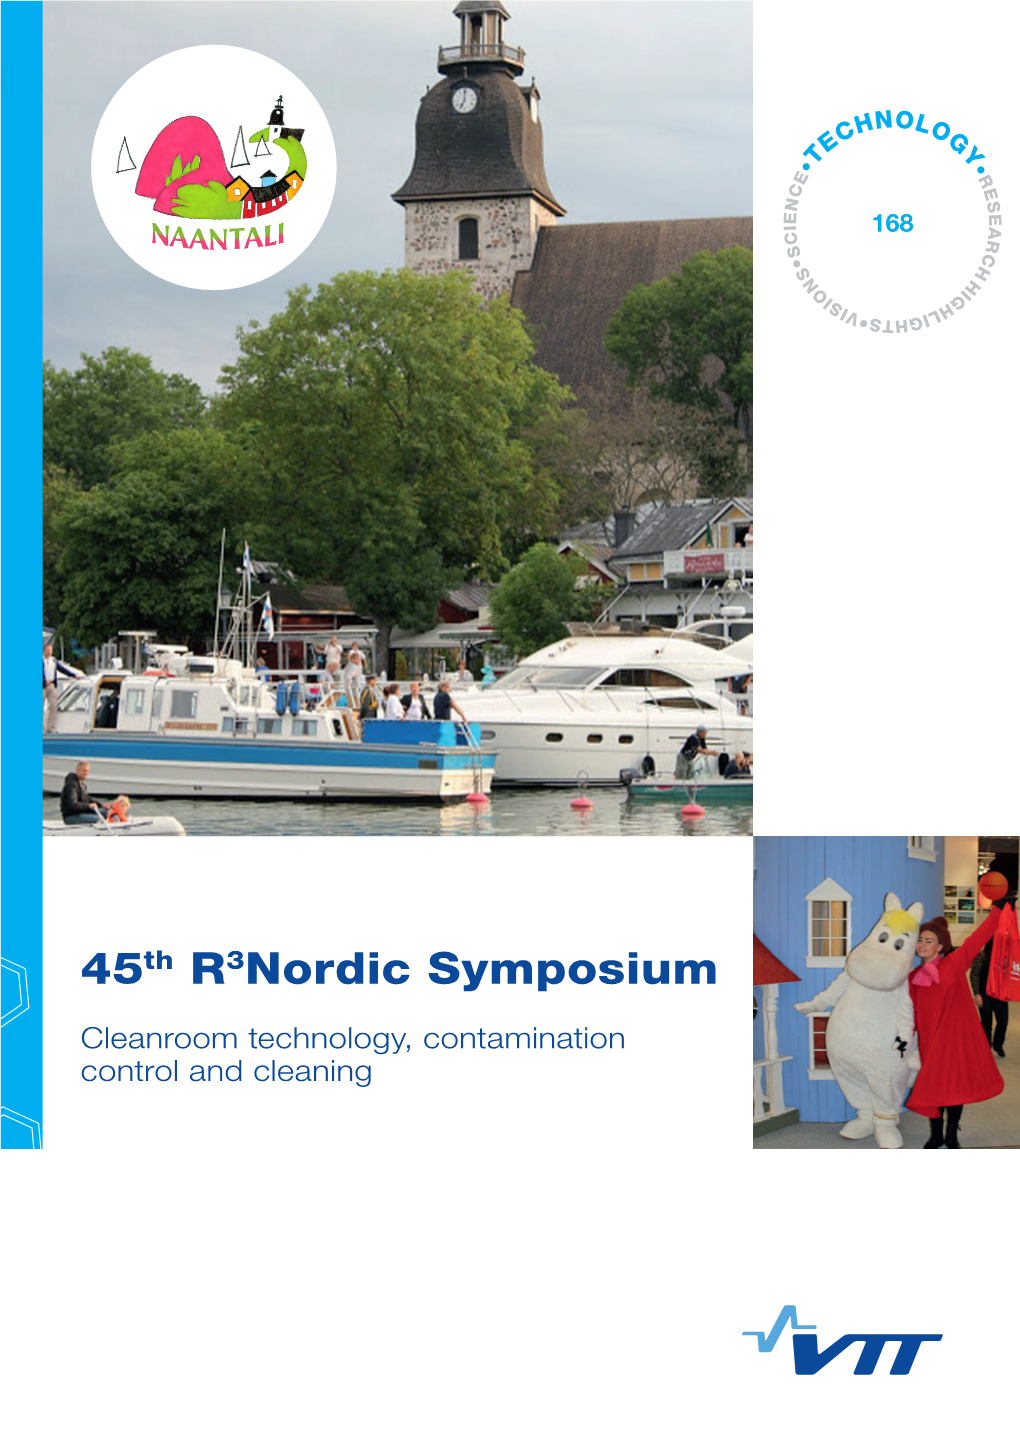 45Th R3nordic Symposium. Cleanroom Technology